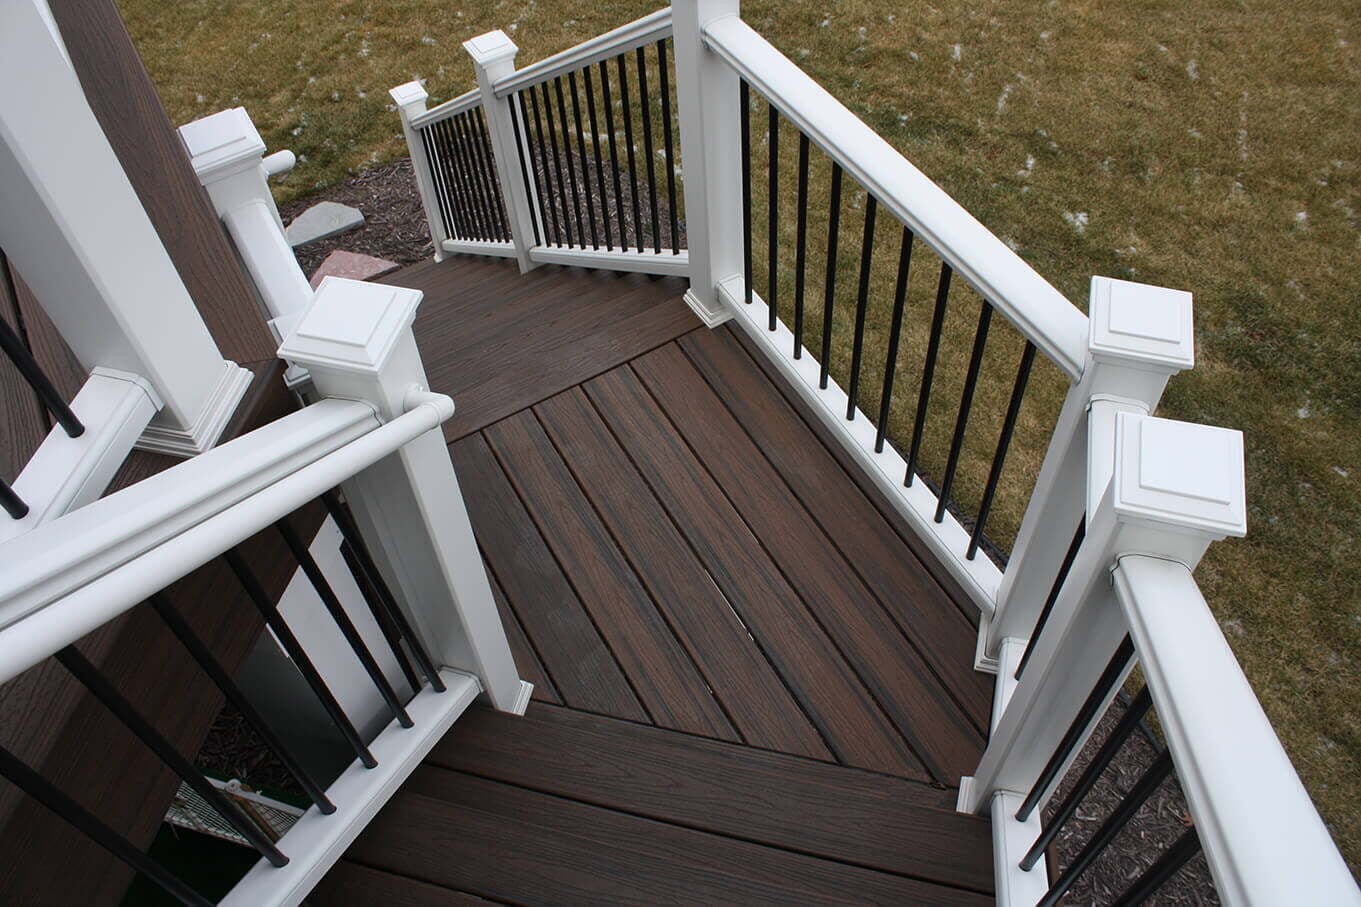 New deck railings - Twin Cities Xpres